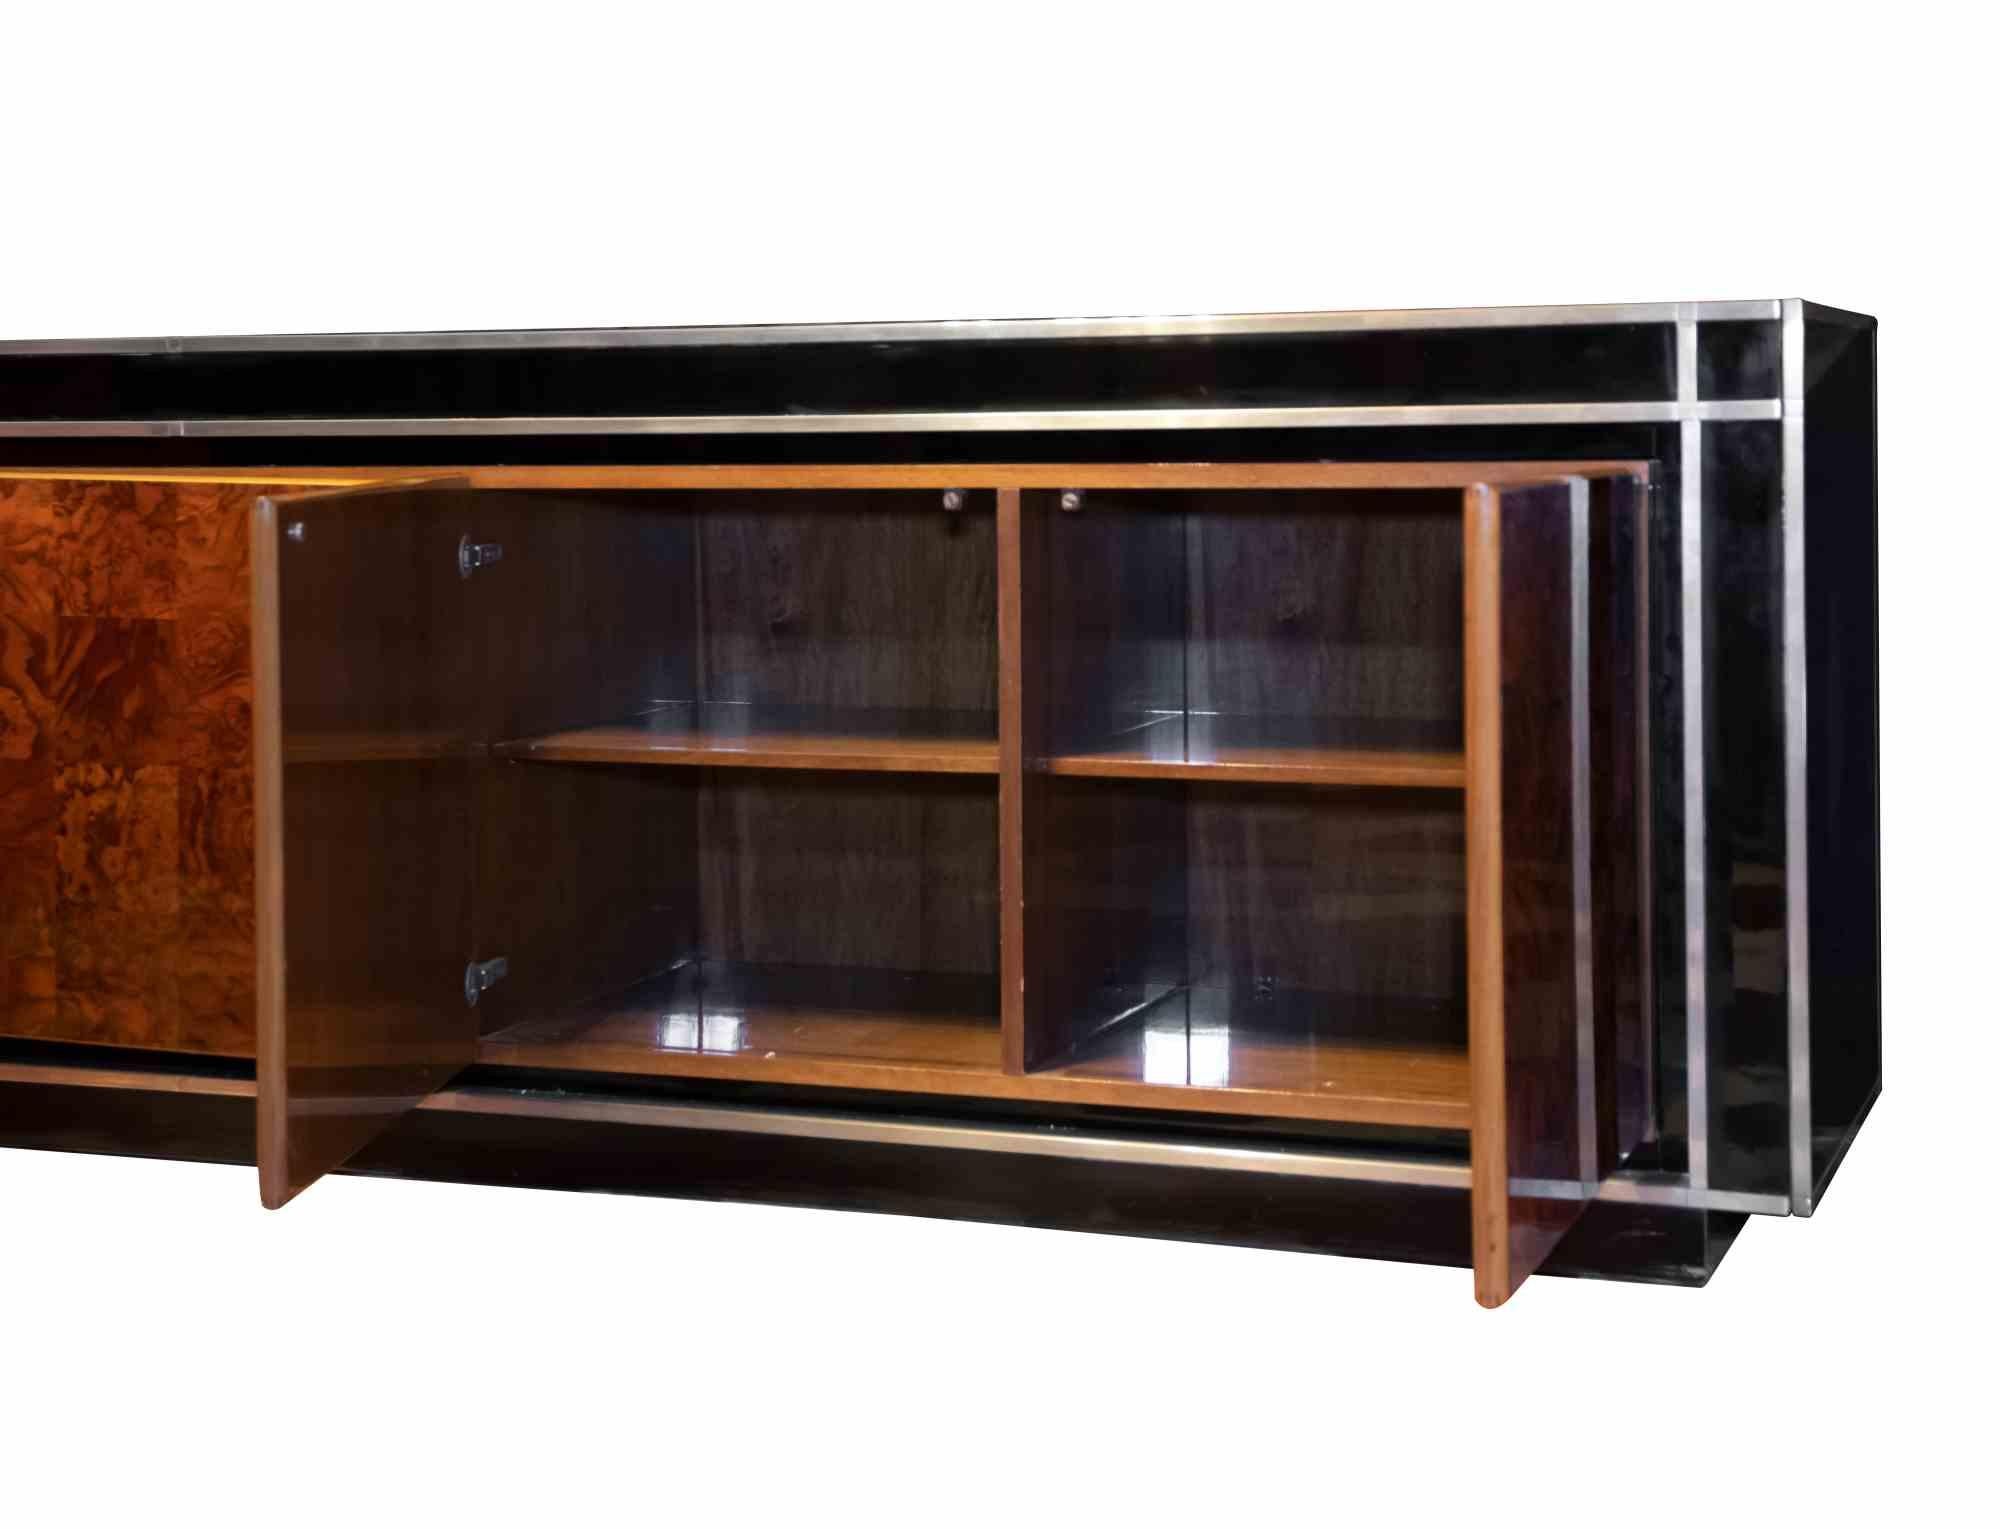 Willy Rizzo Sideboard is an original design furniture realized in the 1970s by Willy Rizzo (Naples, 22 October 1928 – 25 February 2013).

Walnut, mirror and steel Vintage Sideboard.n Created for Mario Sabot.

Total dimensions: 80 x 300 x 60 cm.